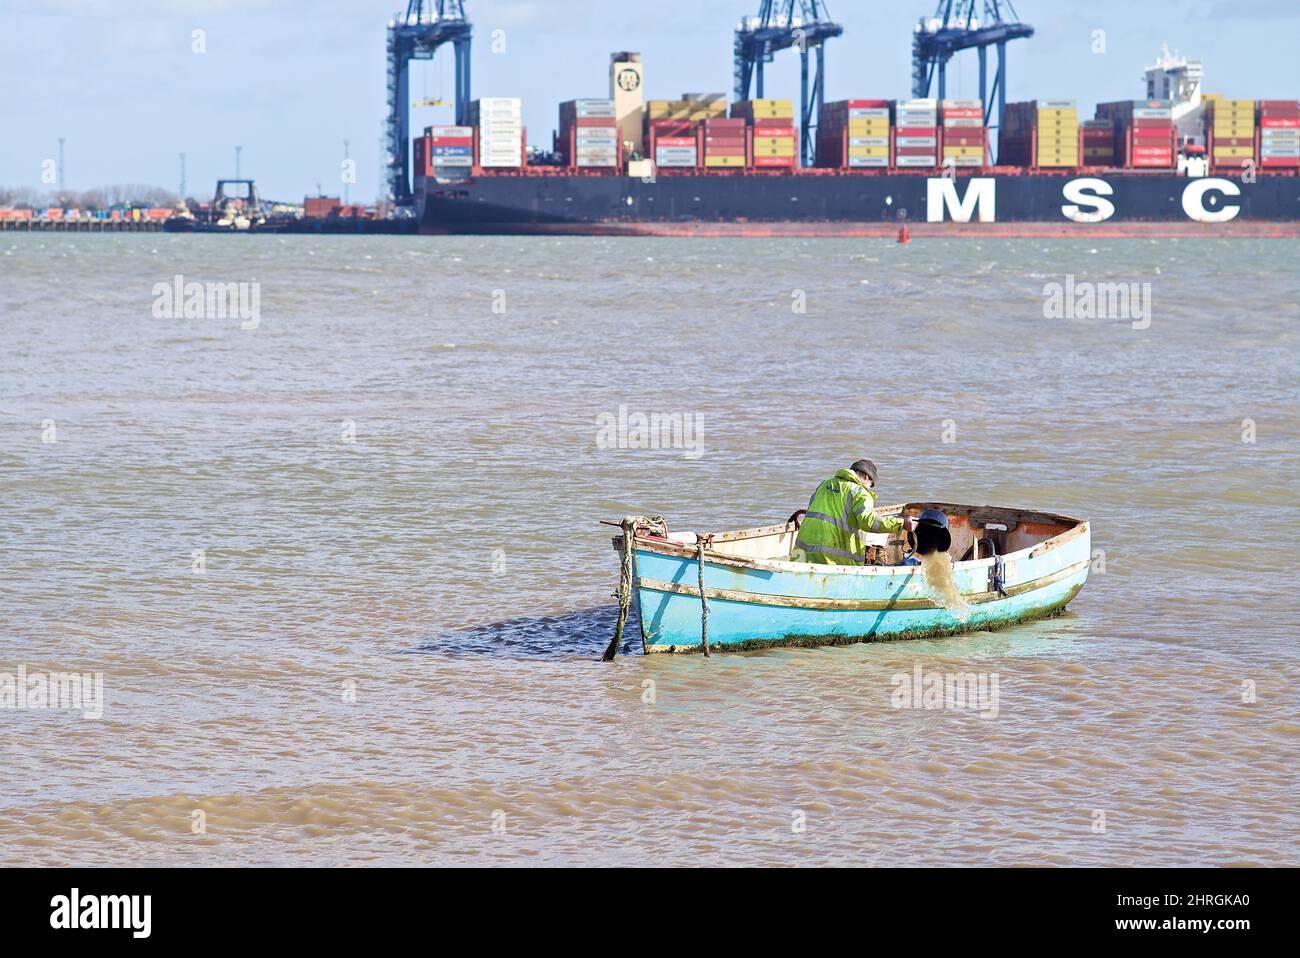 Fisherman bailing out his boat before going out to fish. Stock Photo